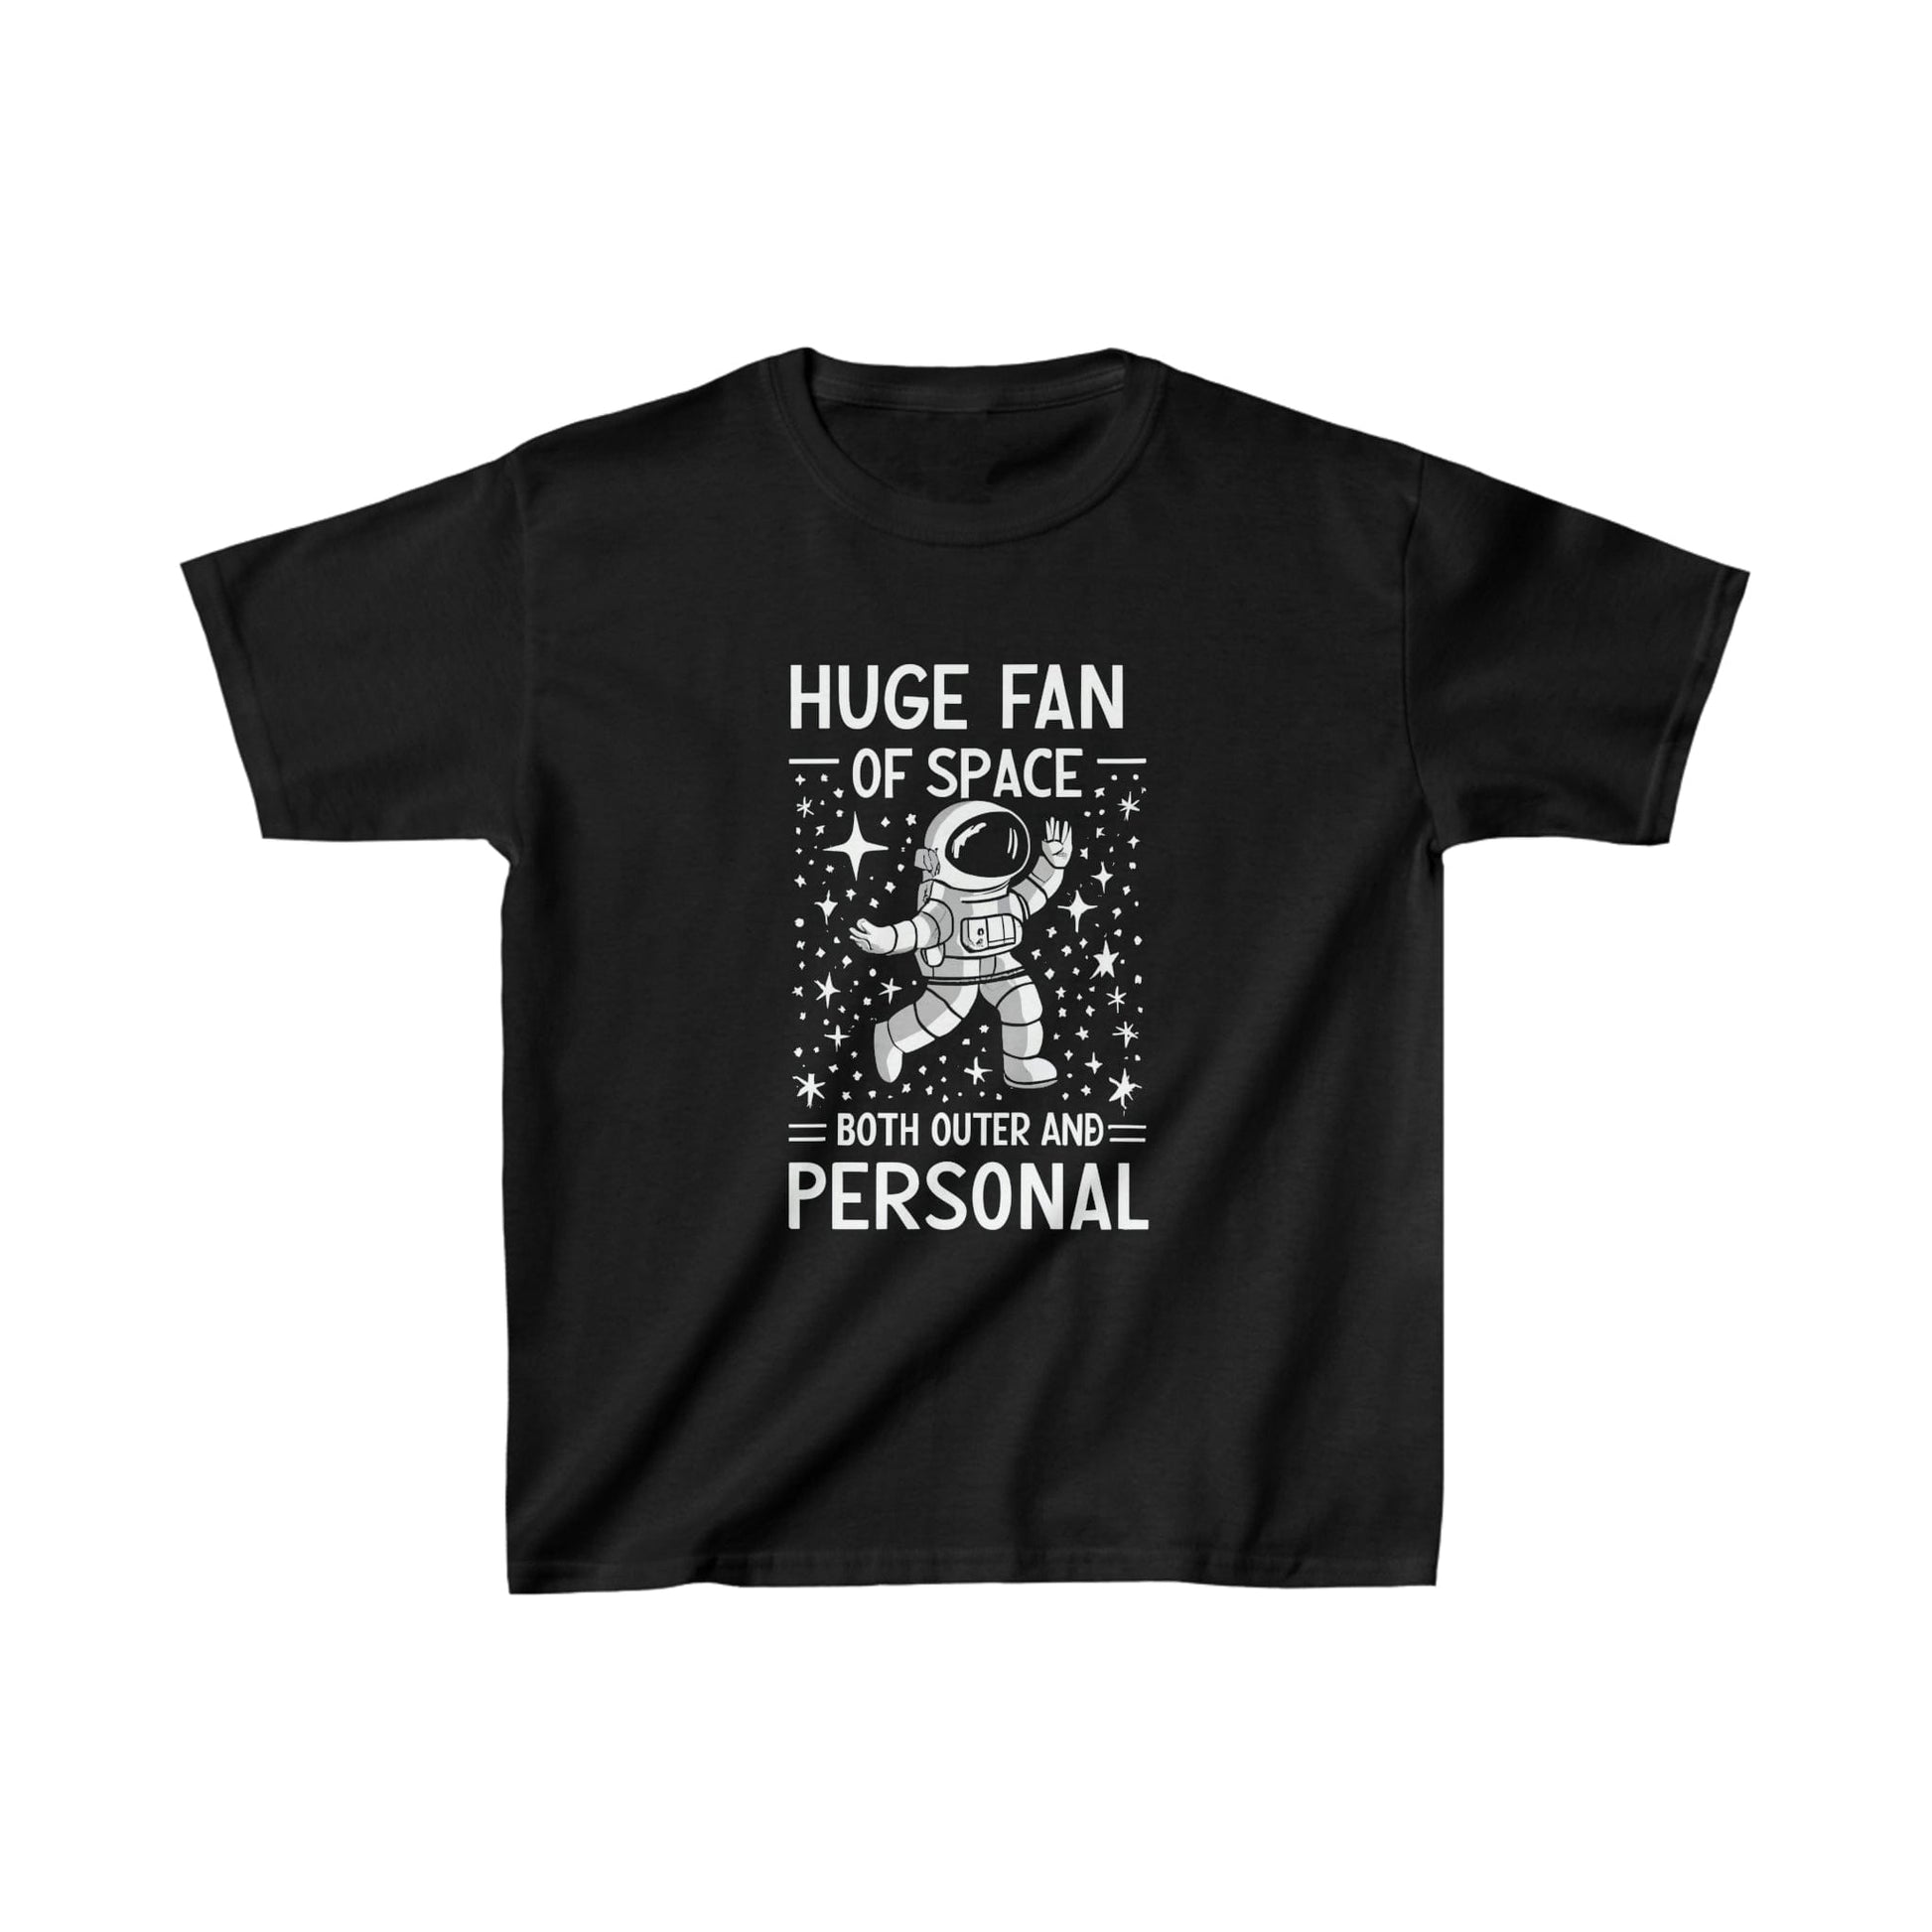 Kids clothes XS / Black Youth Huge Fan of Space T-Shirt